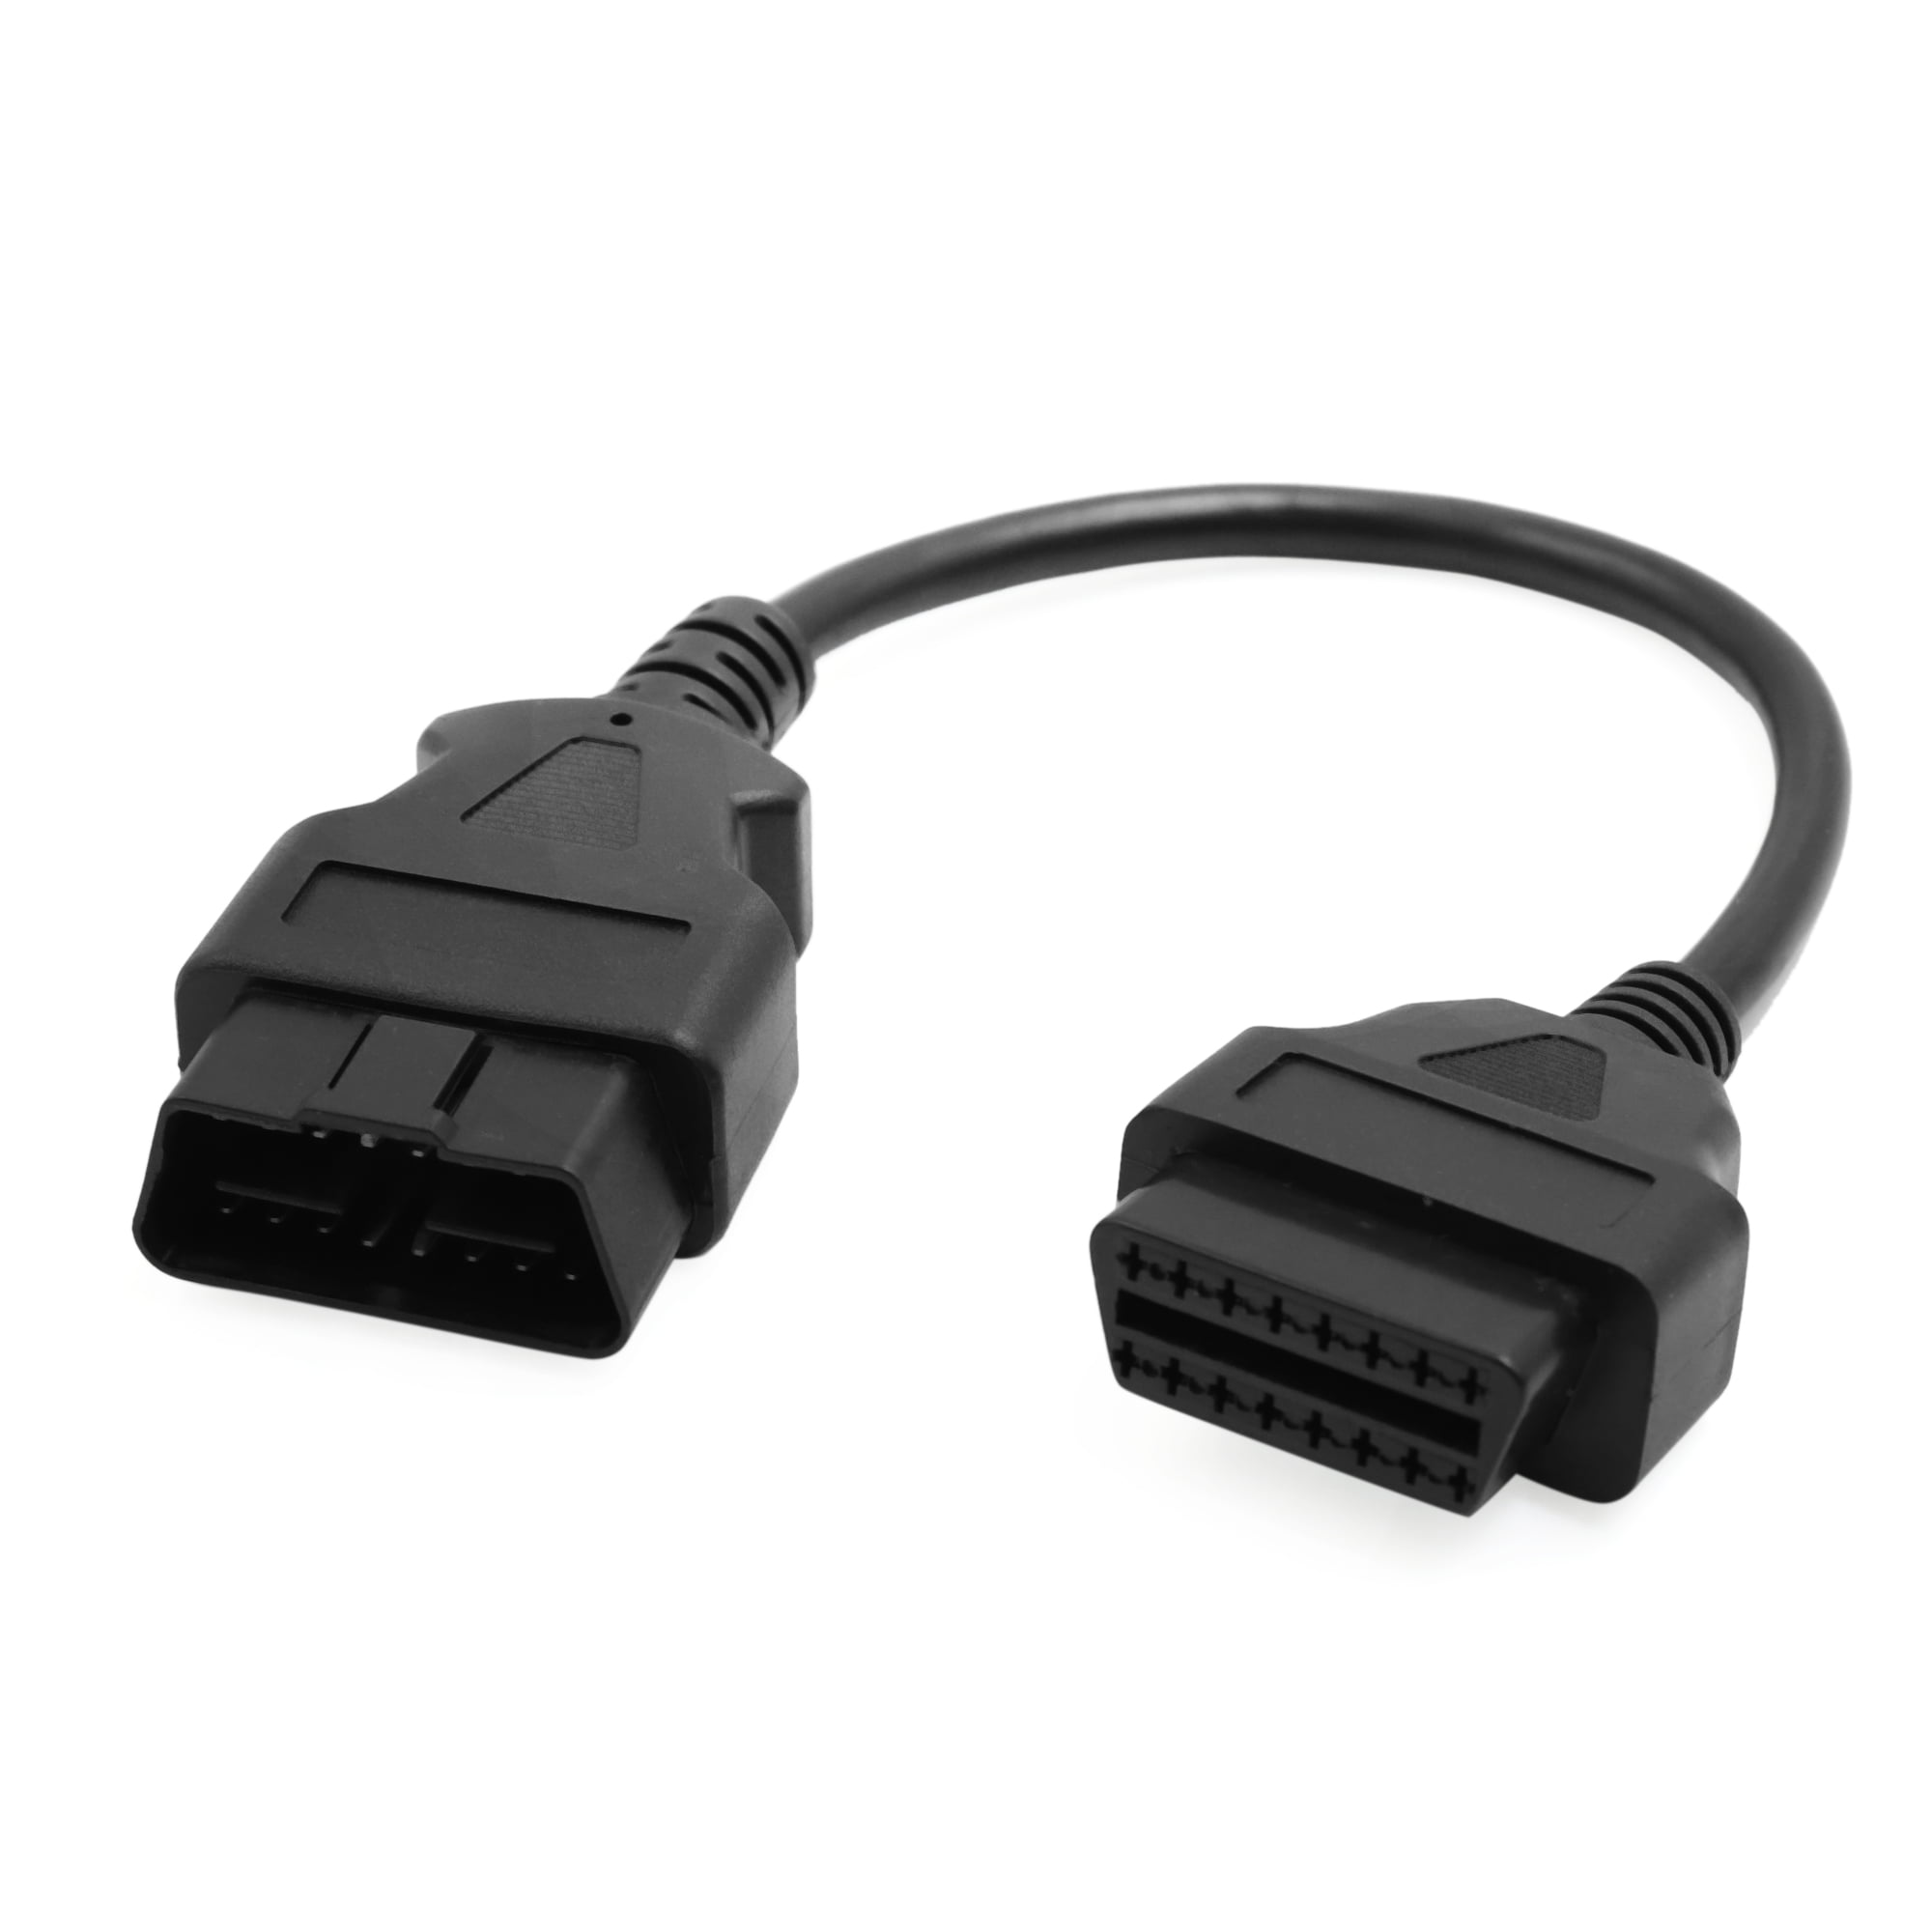 OBD2 OBDII Y Adapter Diagnostic Connector Cable Fits For All Cars 